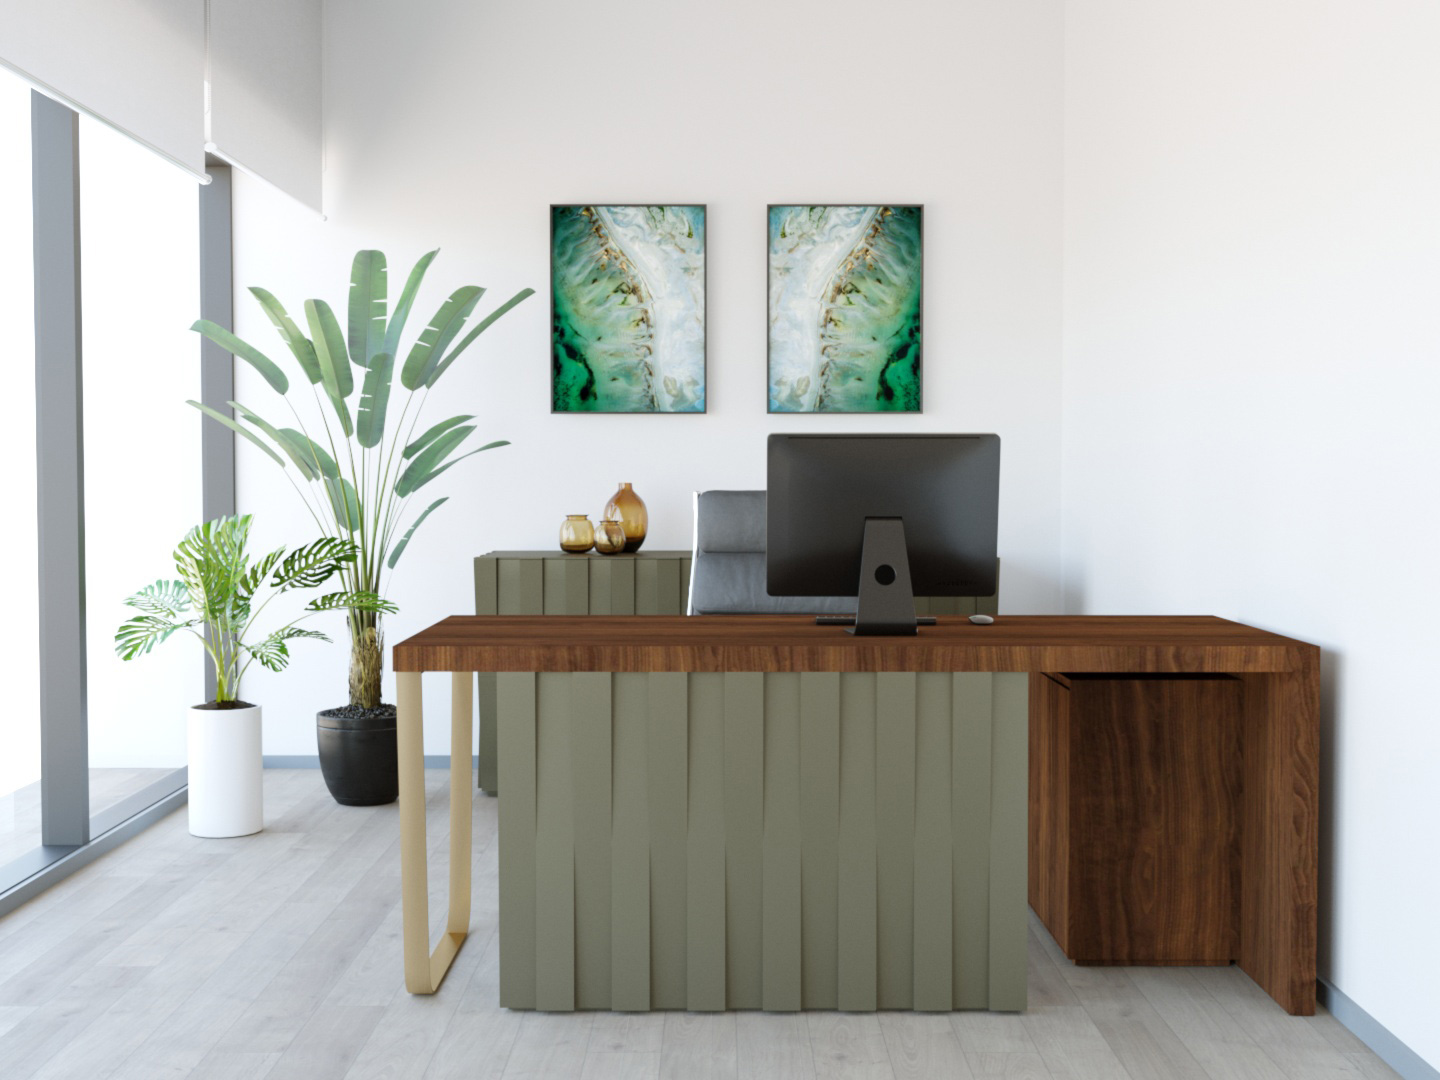 Image description: Home office inspired by nature, ideal for remote work. With shades of green and natural plants.